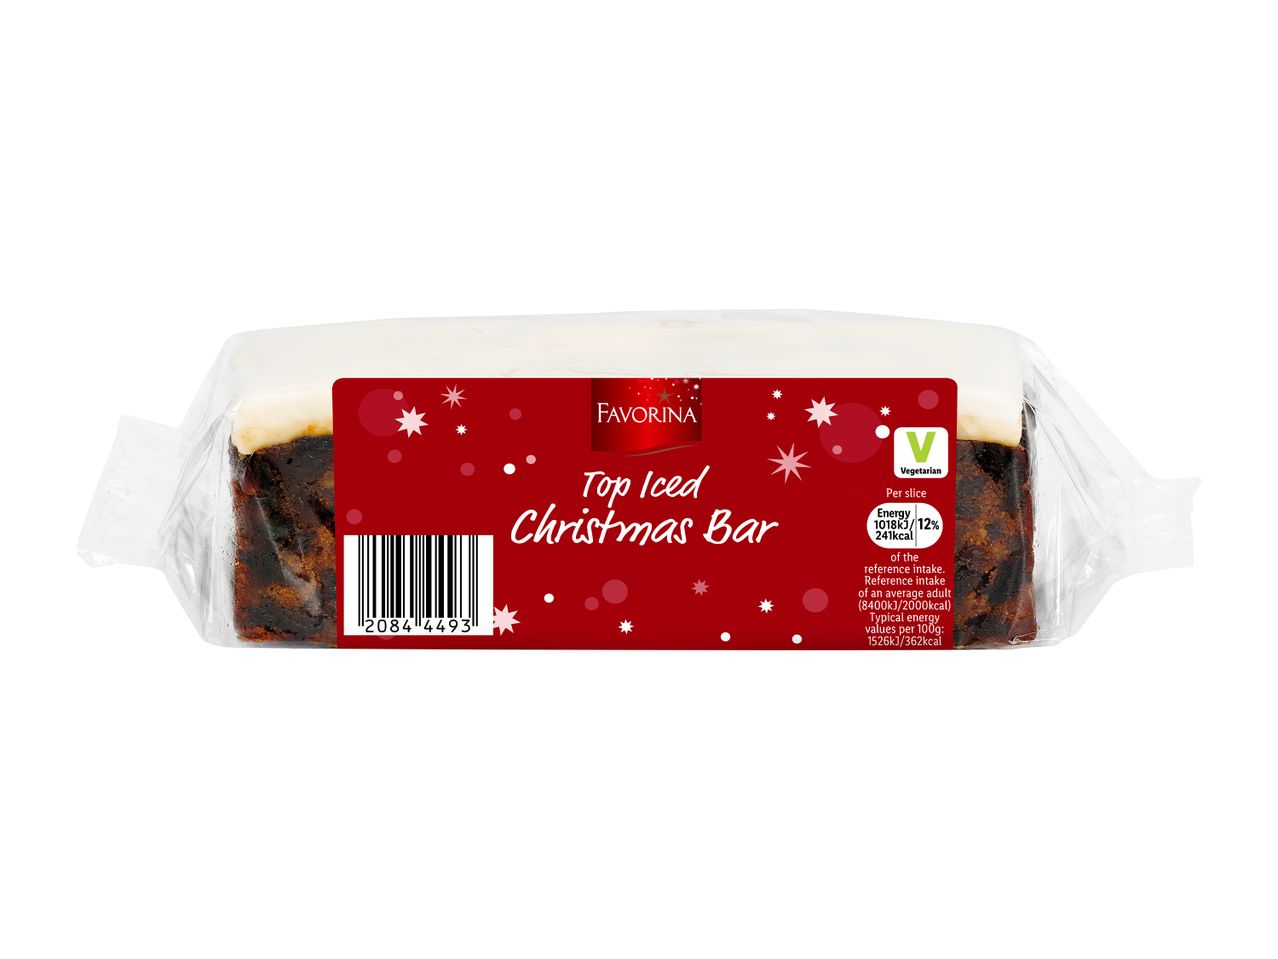 Go to full screen view: Favorina Top Iced Christmas Cake Bar - Image 1